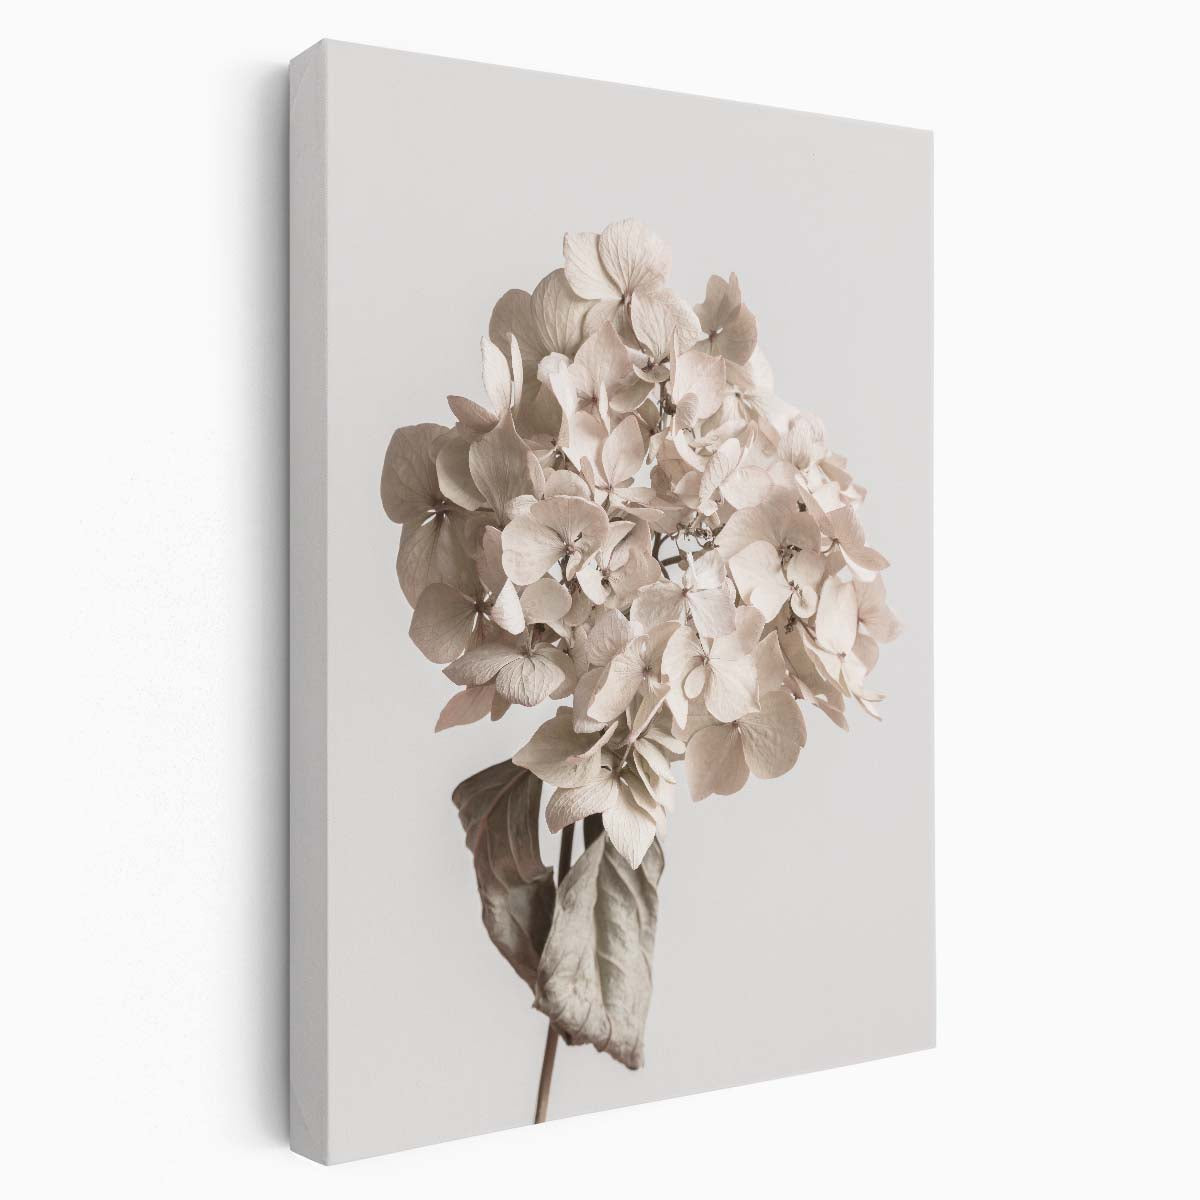 Beige Dried Flower Still Life Botanical Photography Art by Luxuriance Designs, made in USA